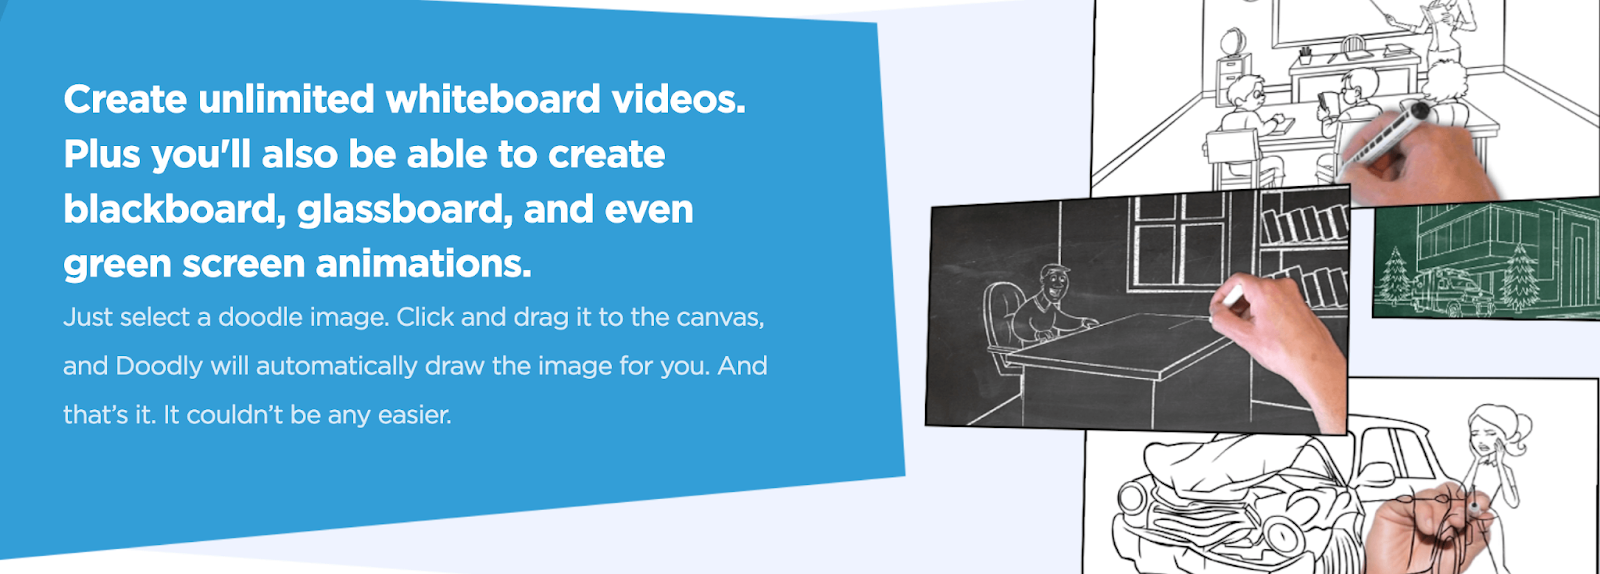 Doodly Review 2022: Is it the Best Whiteboard Animation Software?